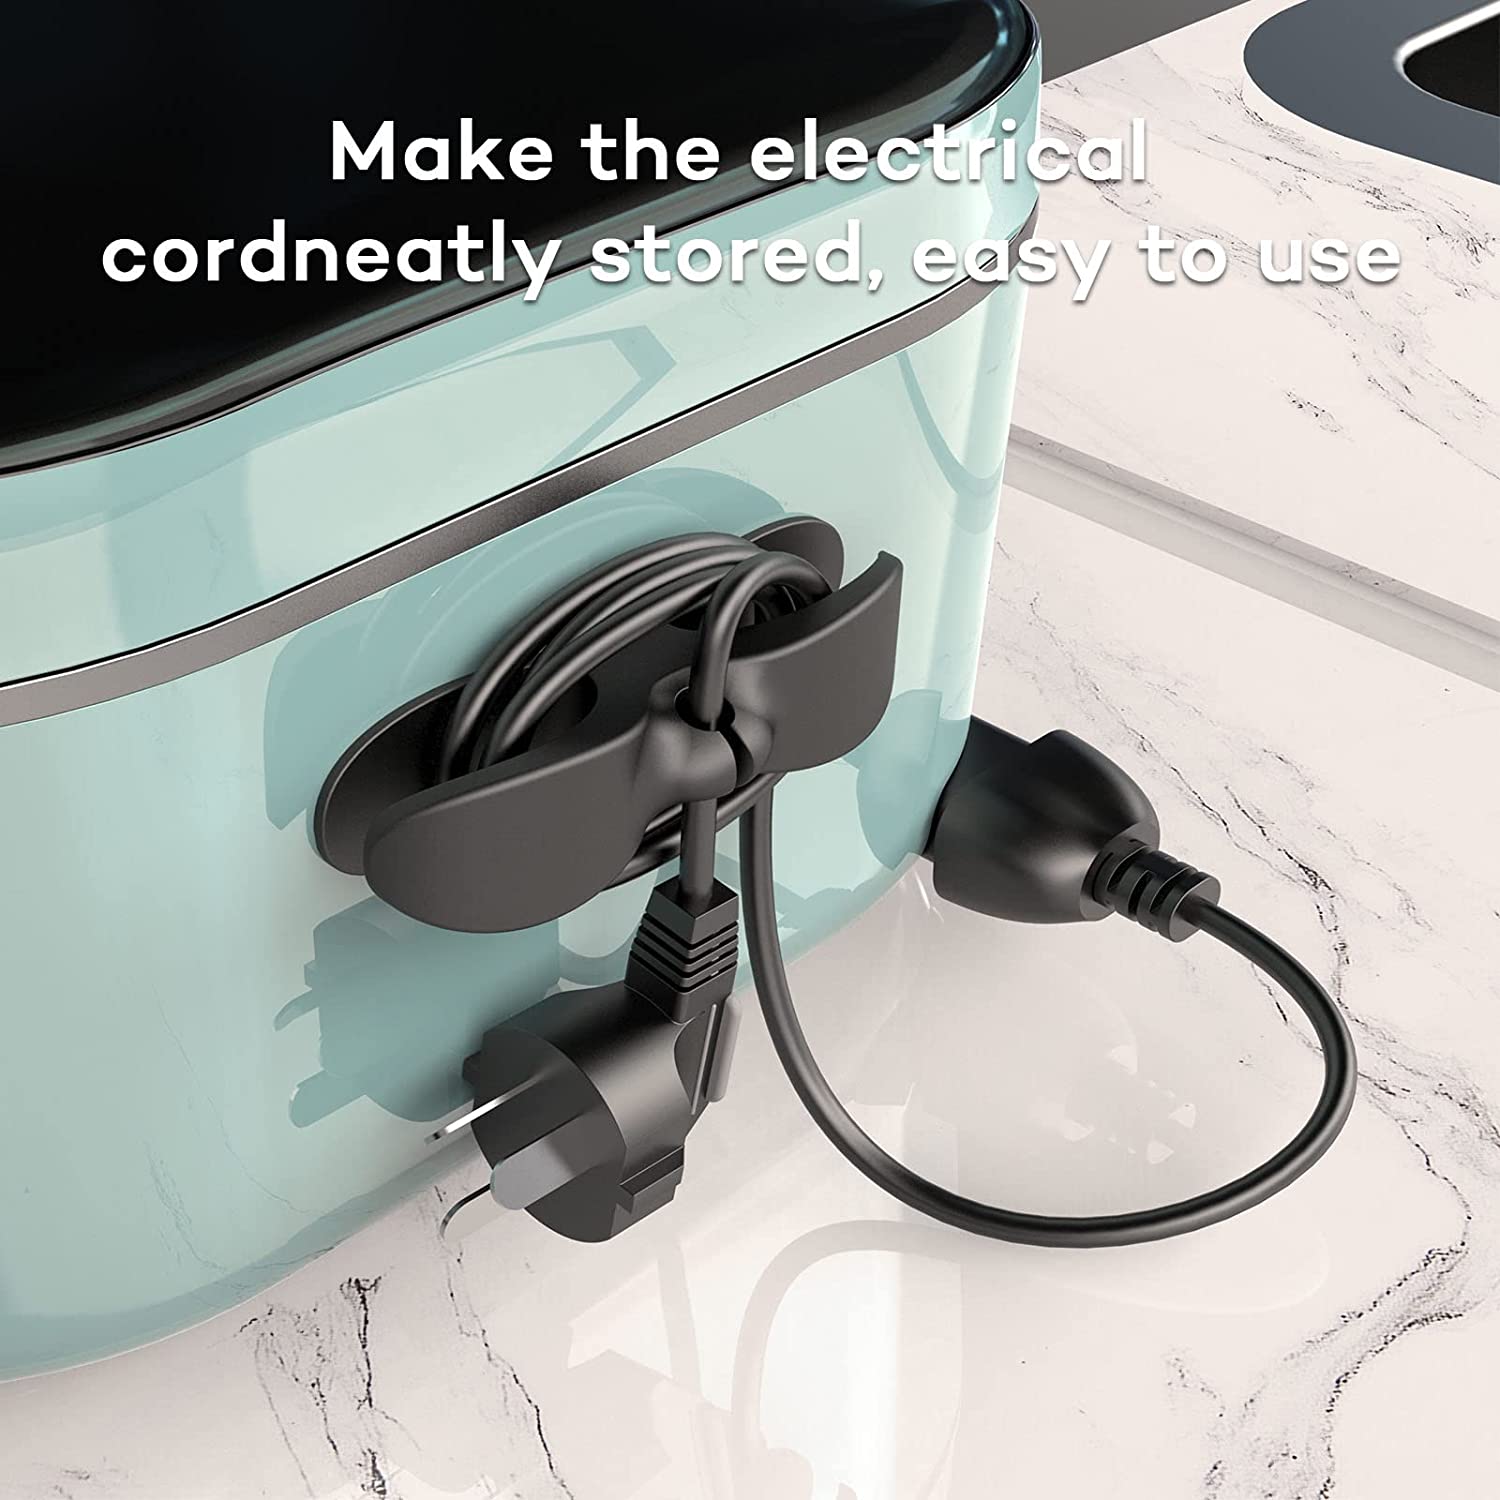  6PCS Clear Cord Organizer for Appliances, Kitchen Appliance  Cord Organizer Stick On, Appliance Cord Holder, Cord Wrappers, Cord Winder  for Pressure Cooker, Air Fryer, Blender, Coffee Maker, Toaster : Home 